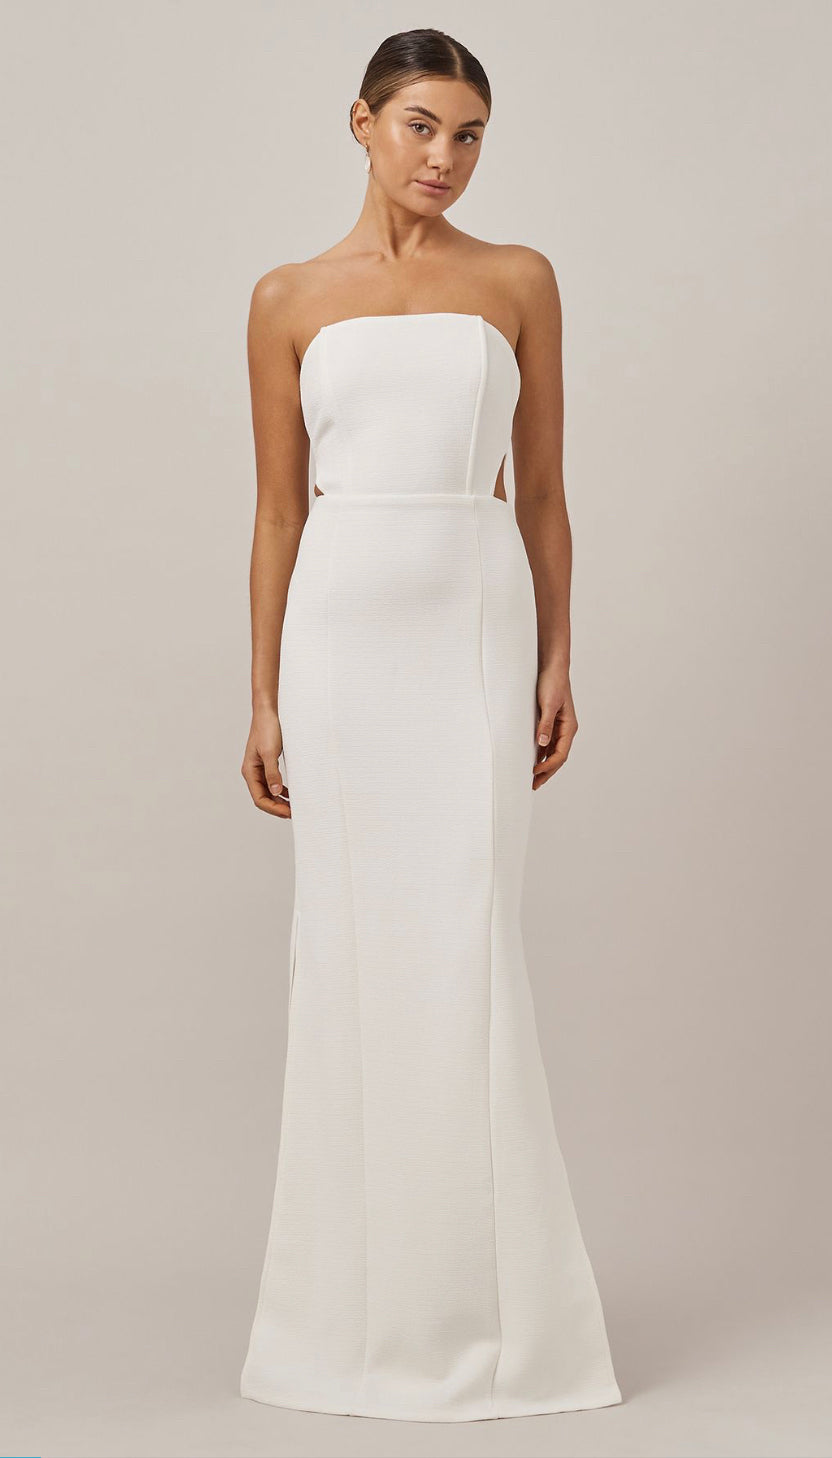 Chancery Allure Gown full length front view